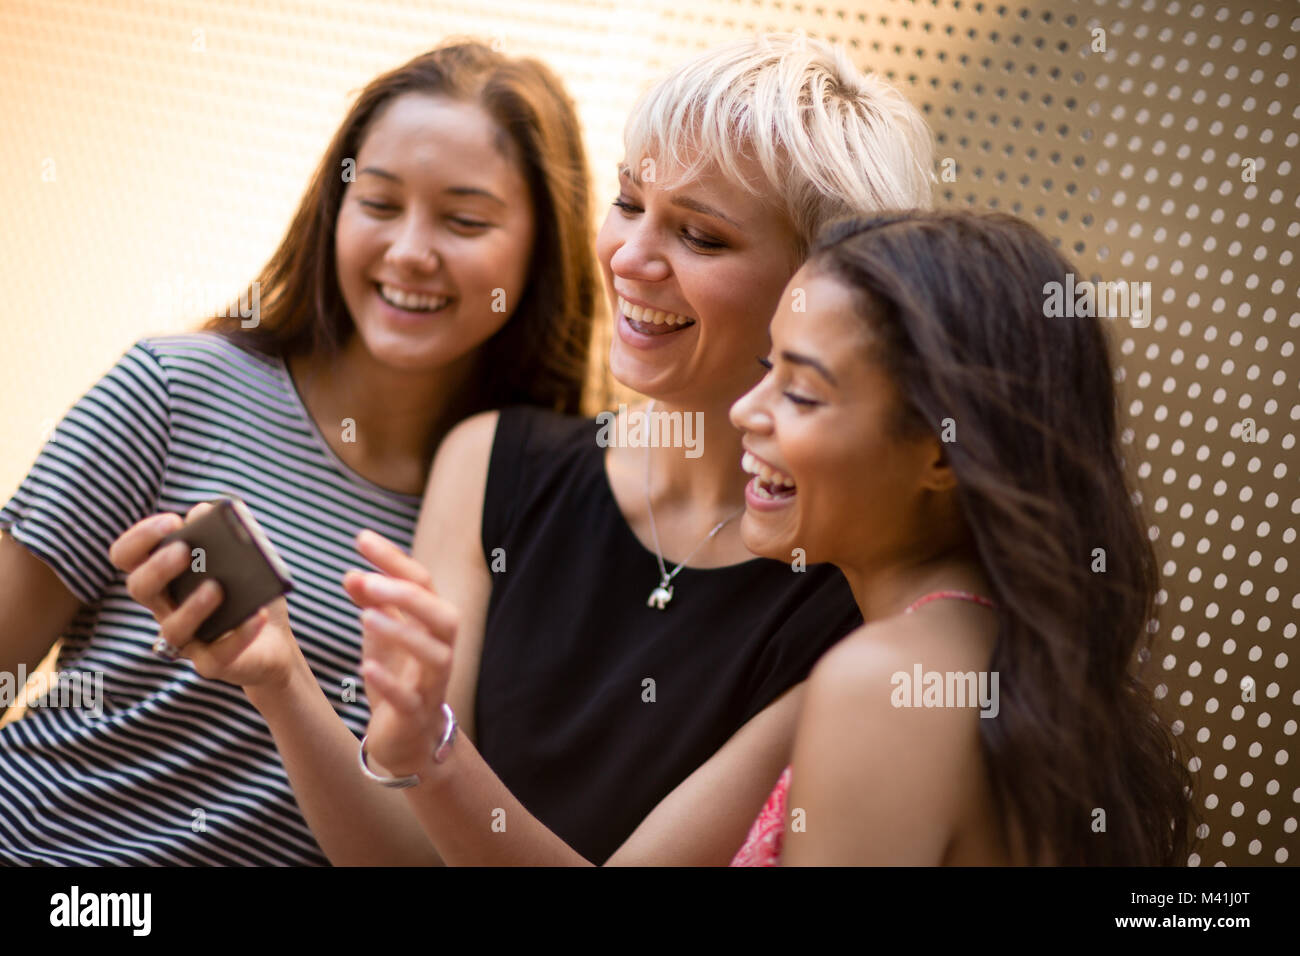 Female friends looking at smartphone Stock Photo